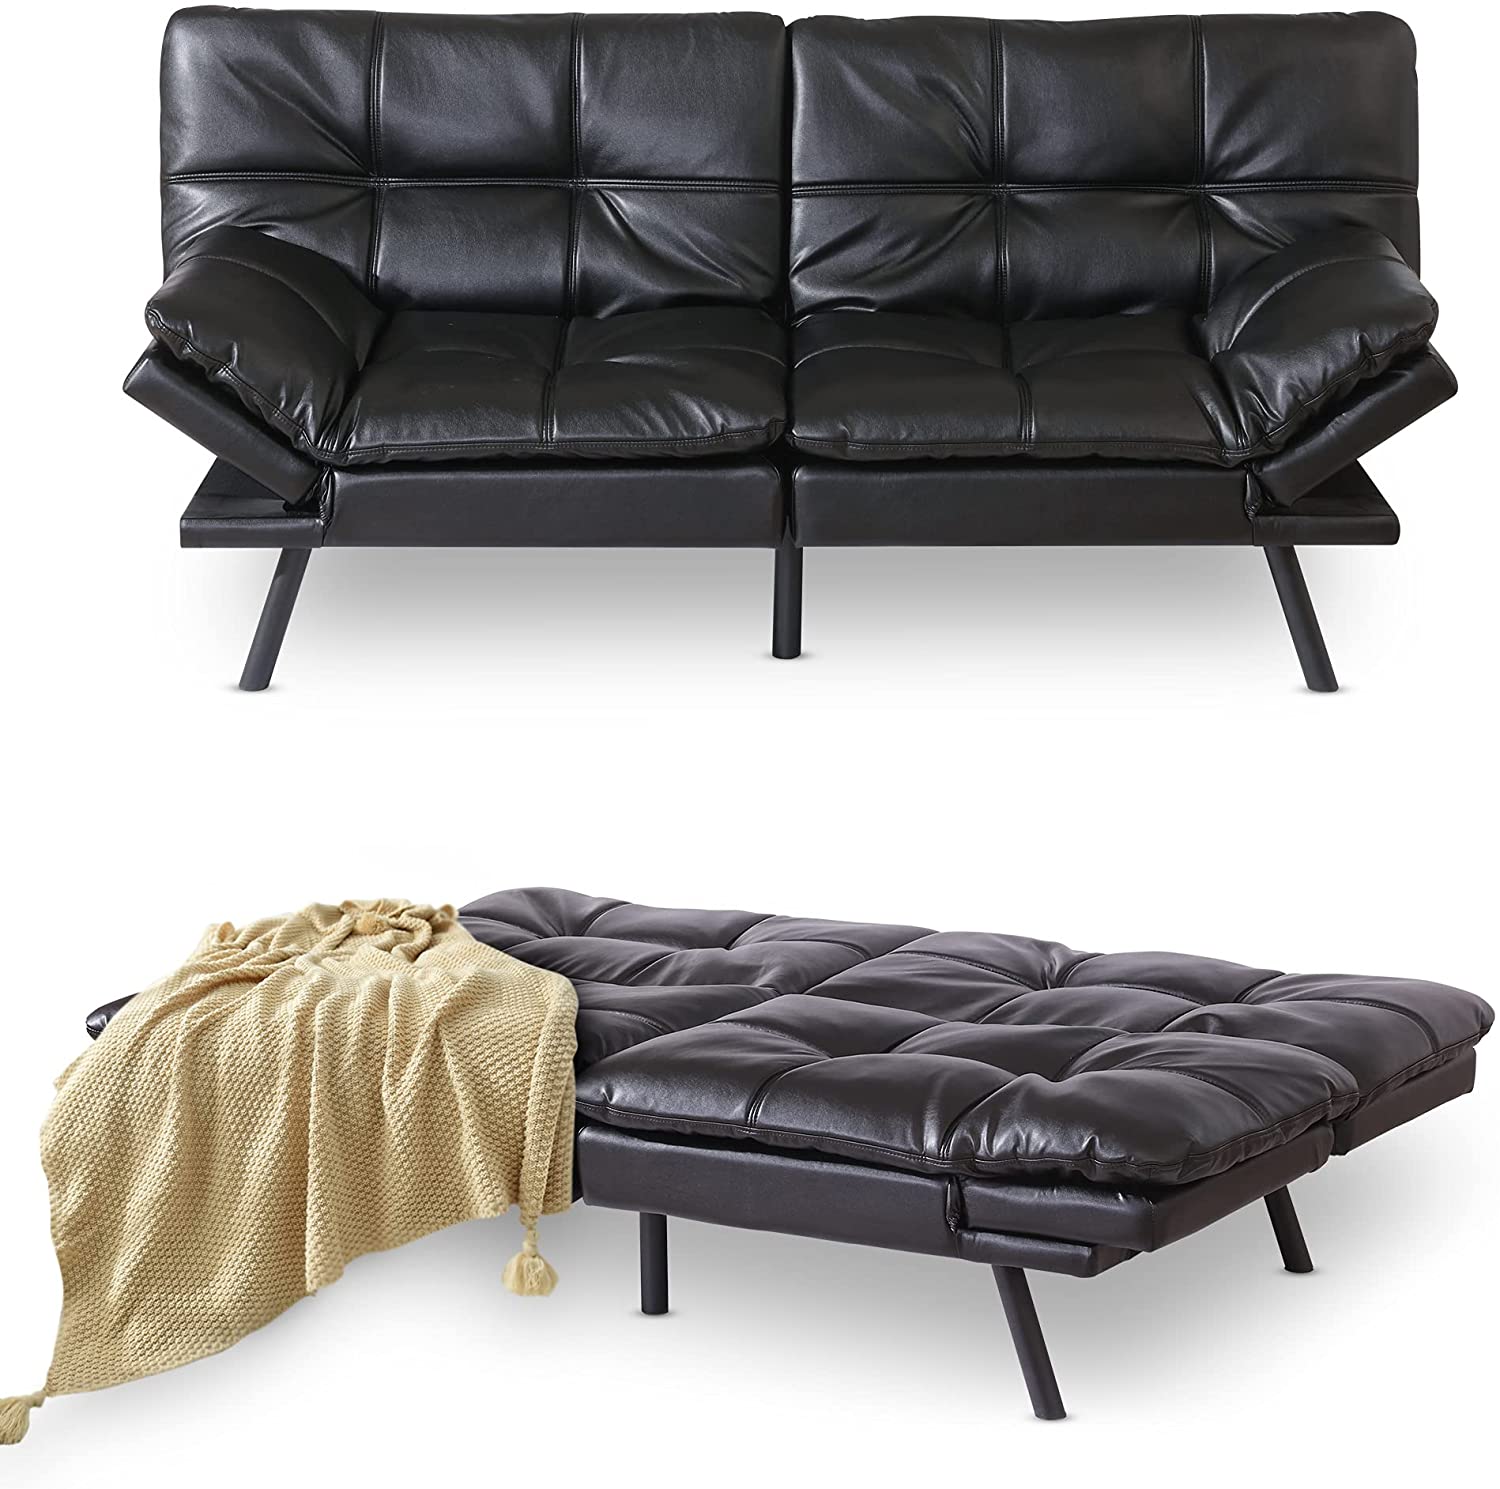 Sofa Cum Beds Convertible Loveseat for Compact Living Spaces